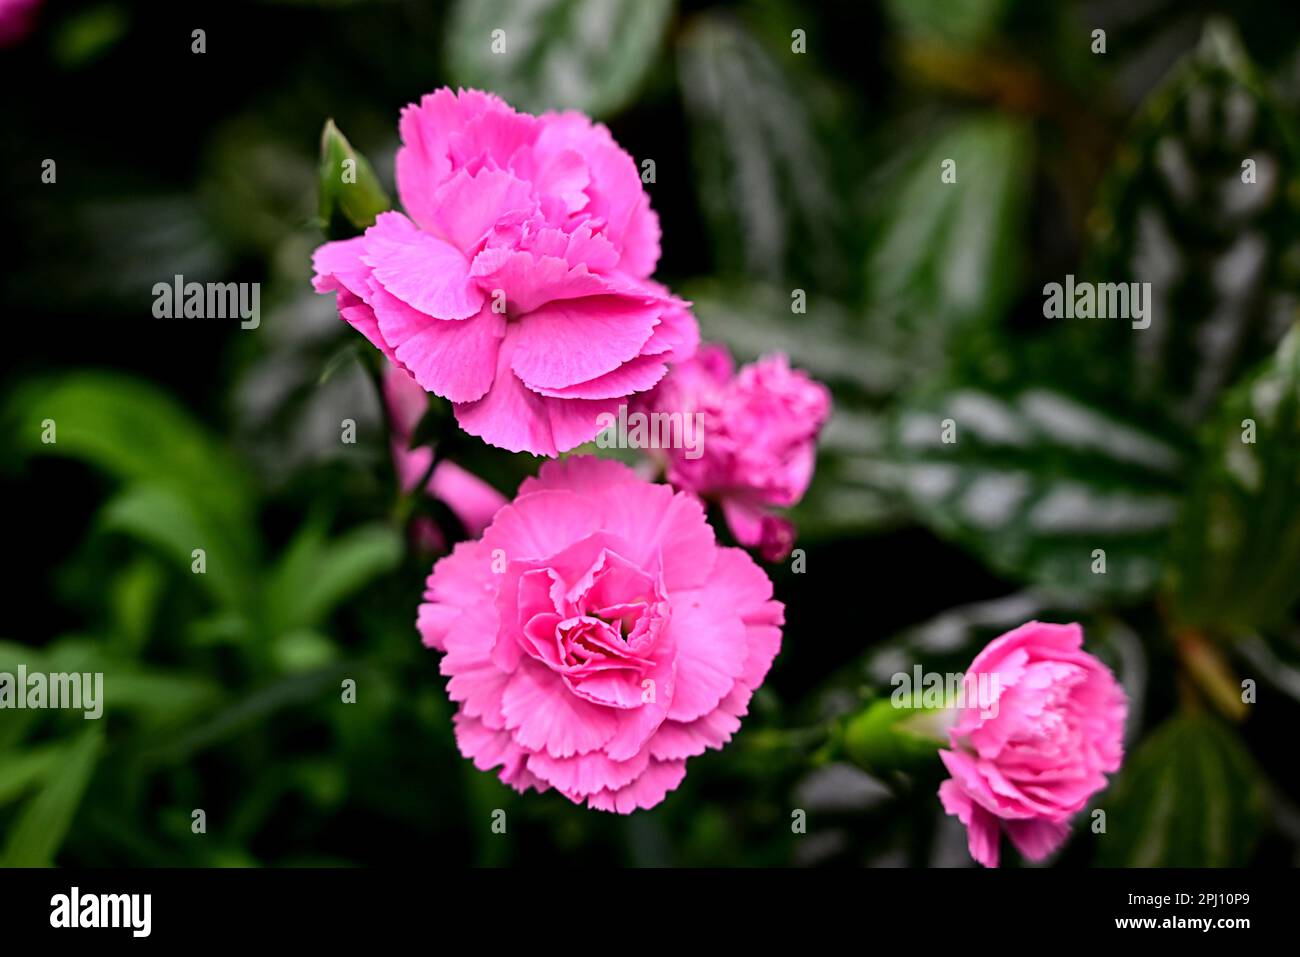 Carnation on a dark background close-up. Pink carnation with a green branch. Stock Photo